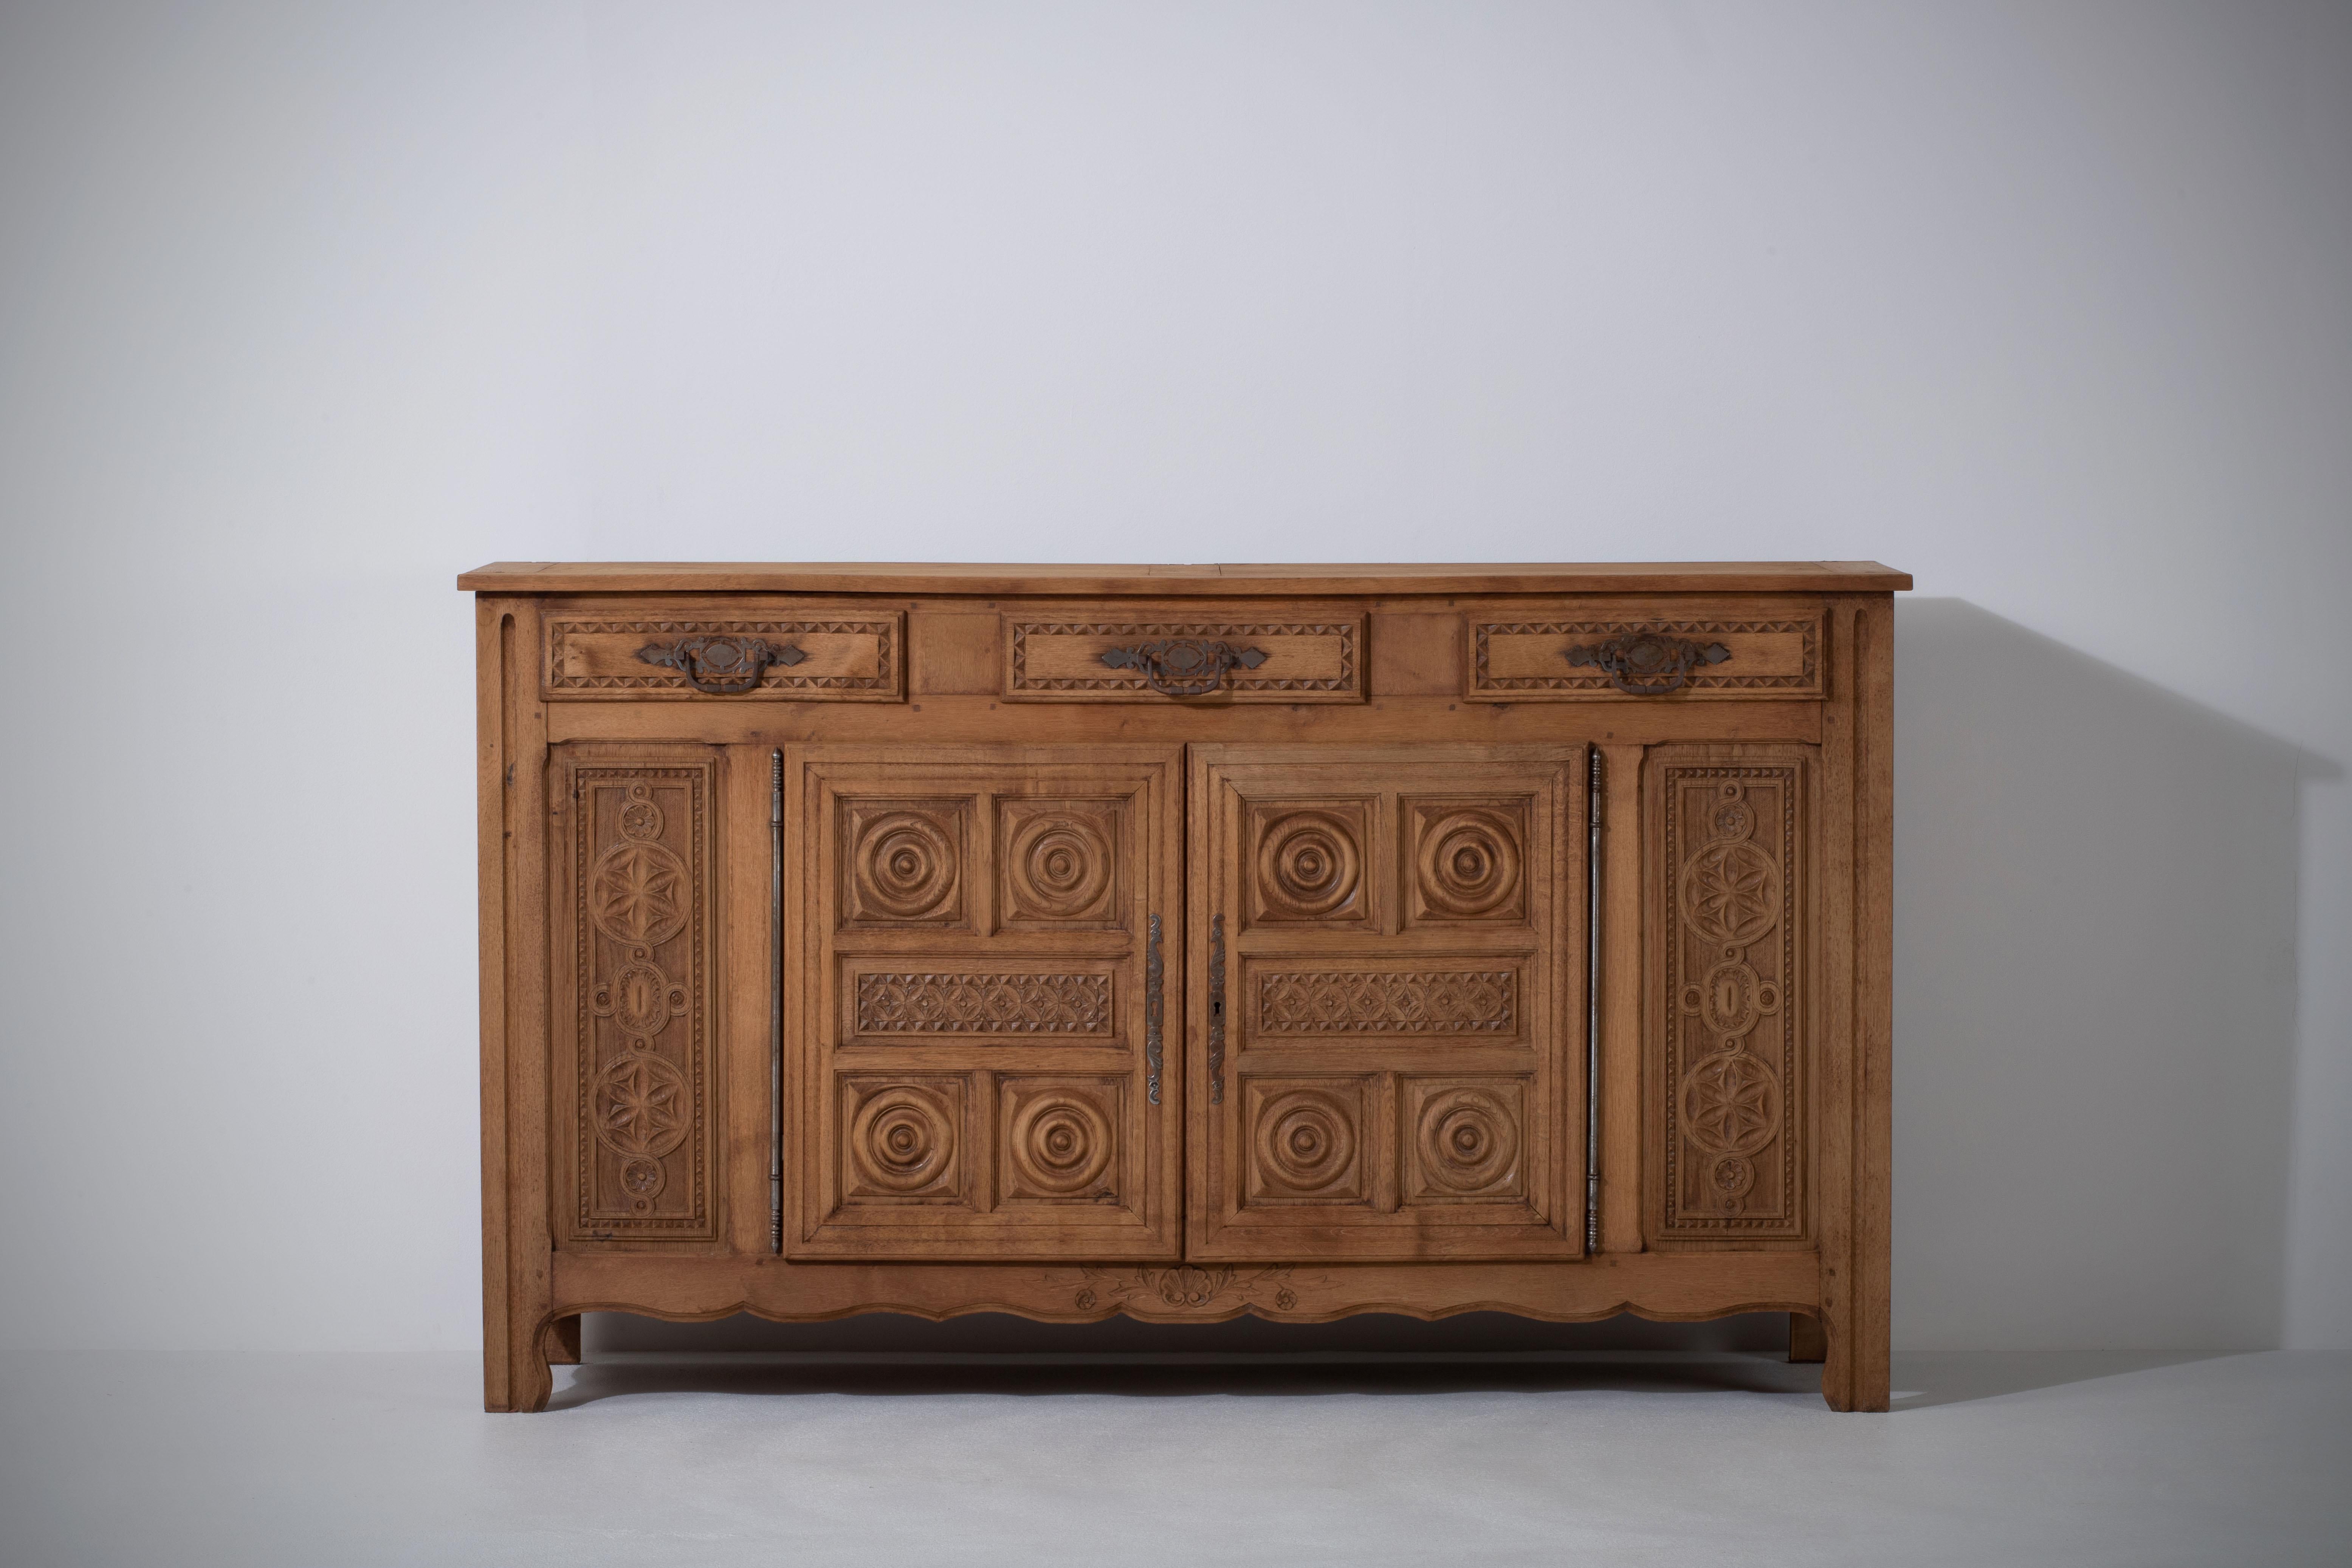 French Bleached Solid Oak Credenza with Graphic Details, France, 1940s For Sale